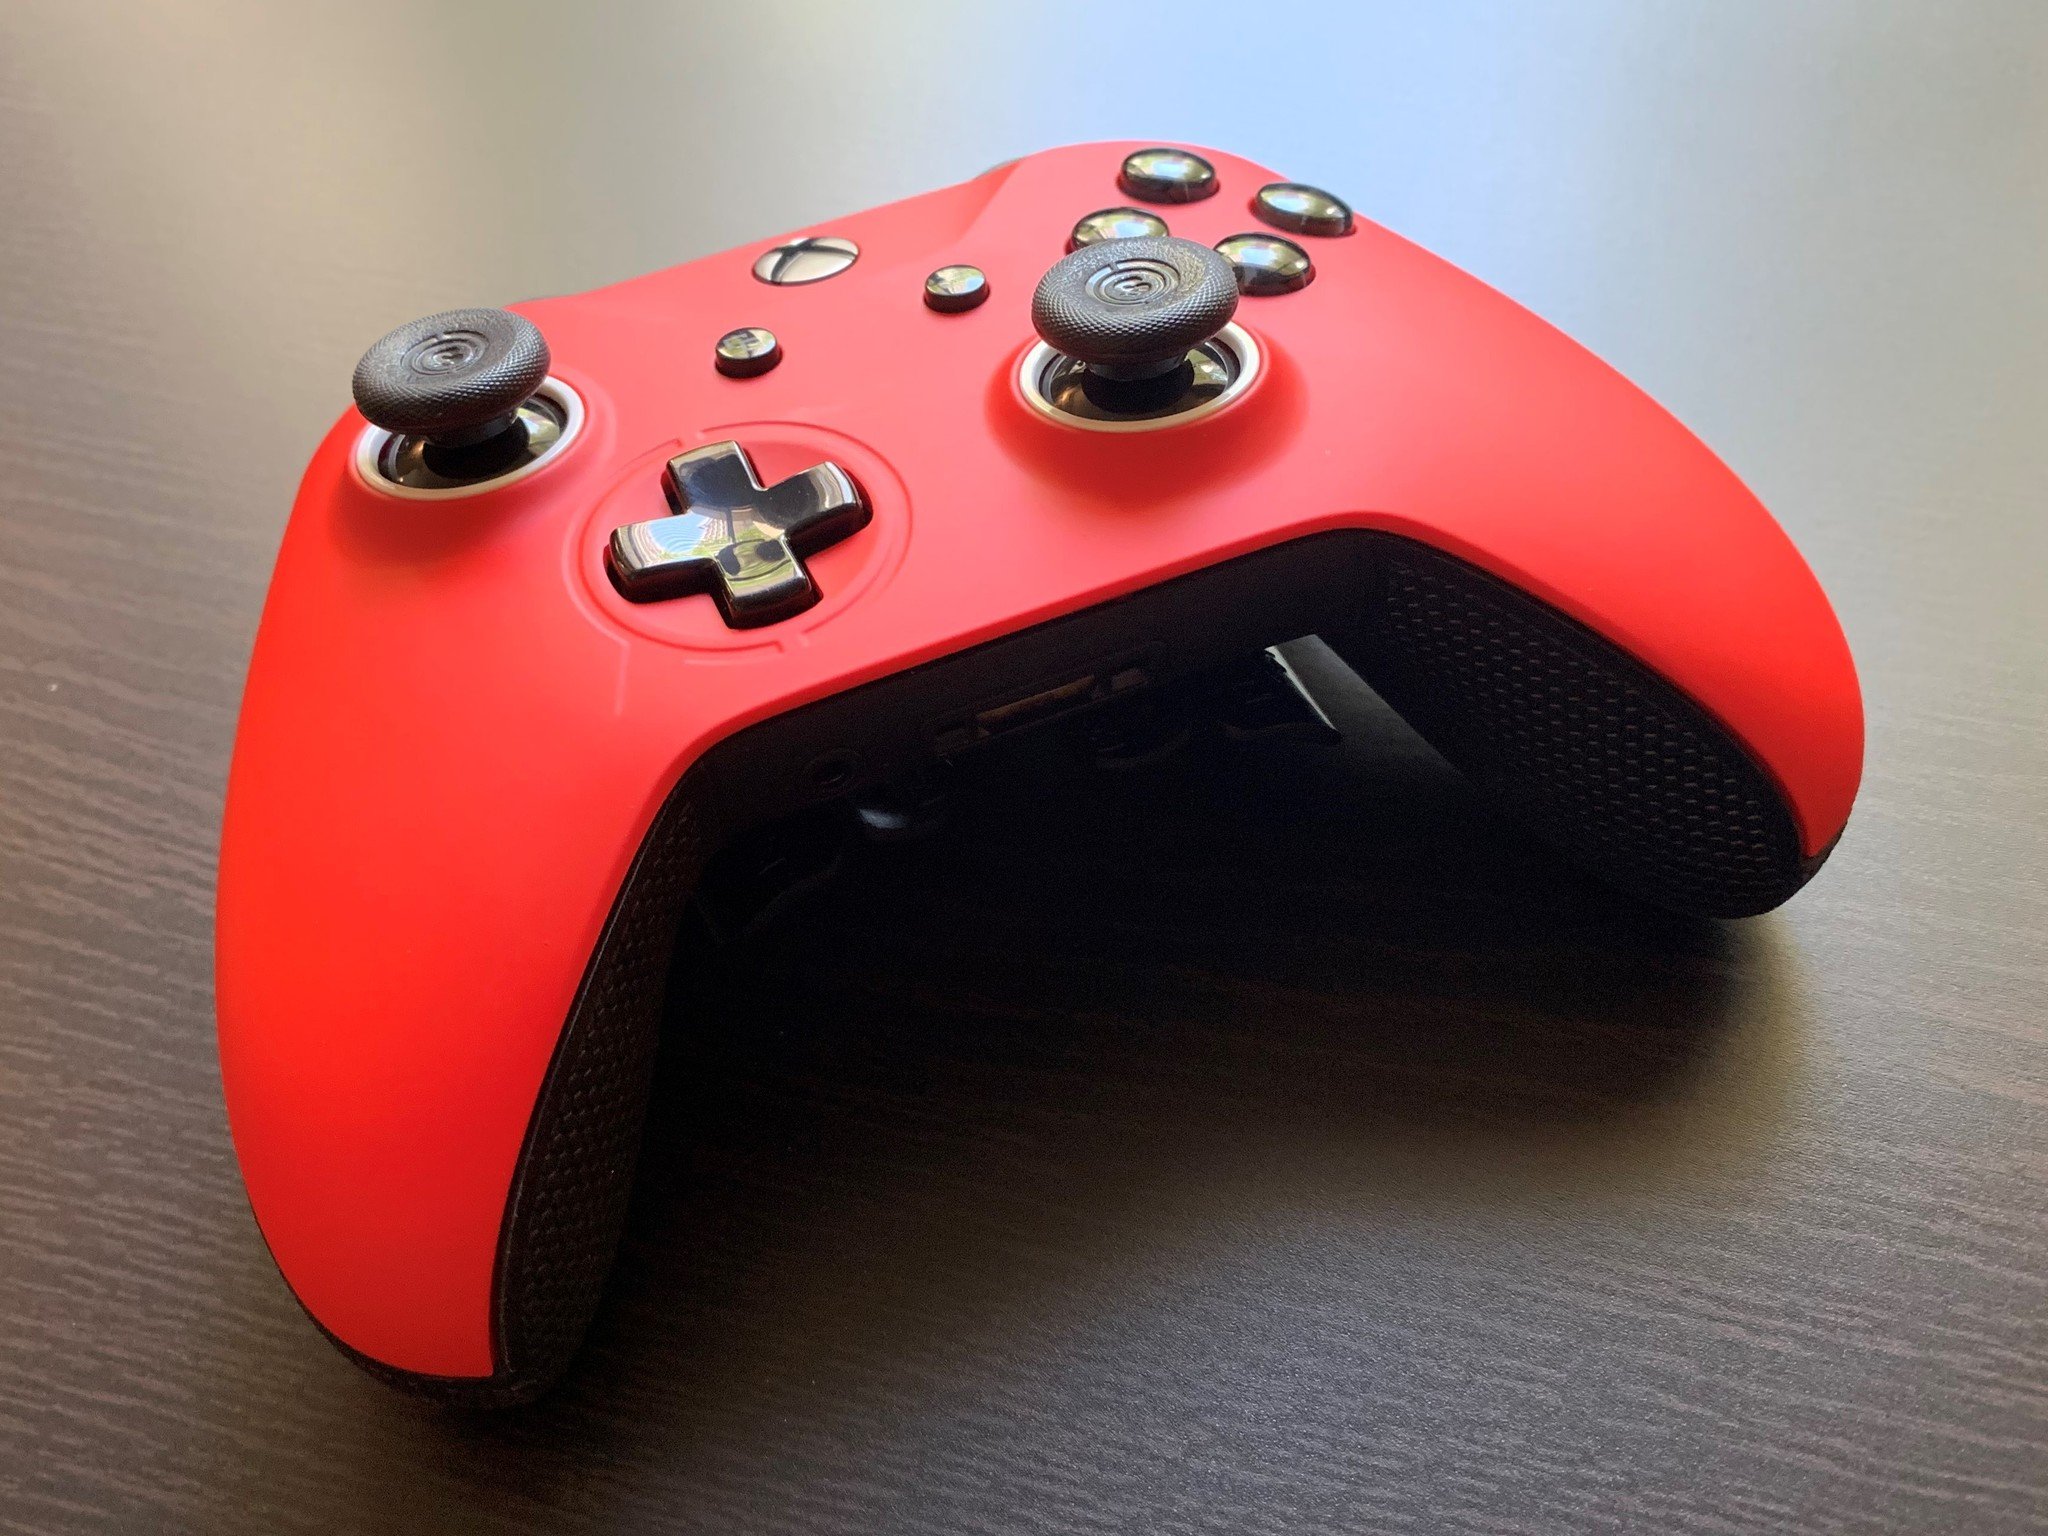 Scuf Prestige for Xbox One and PC review: One of the most advanced 